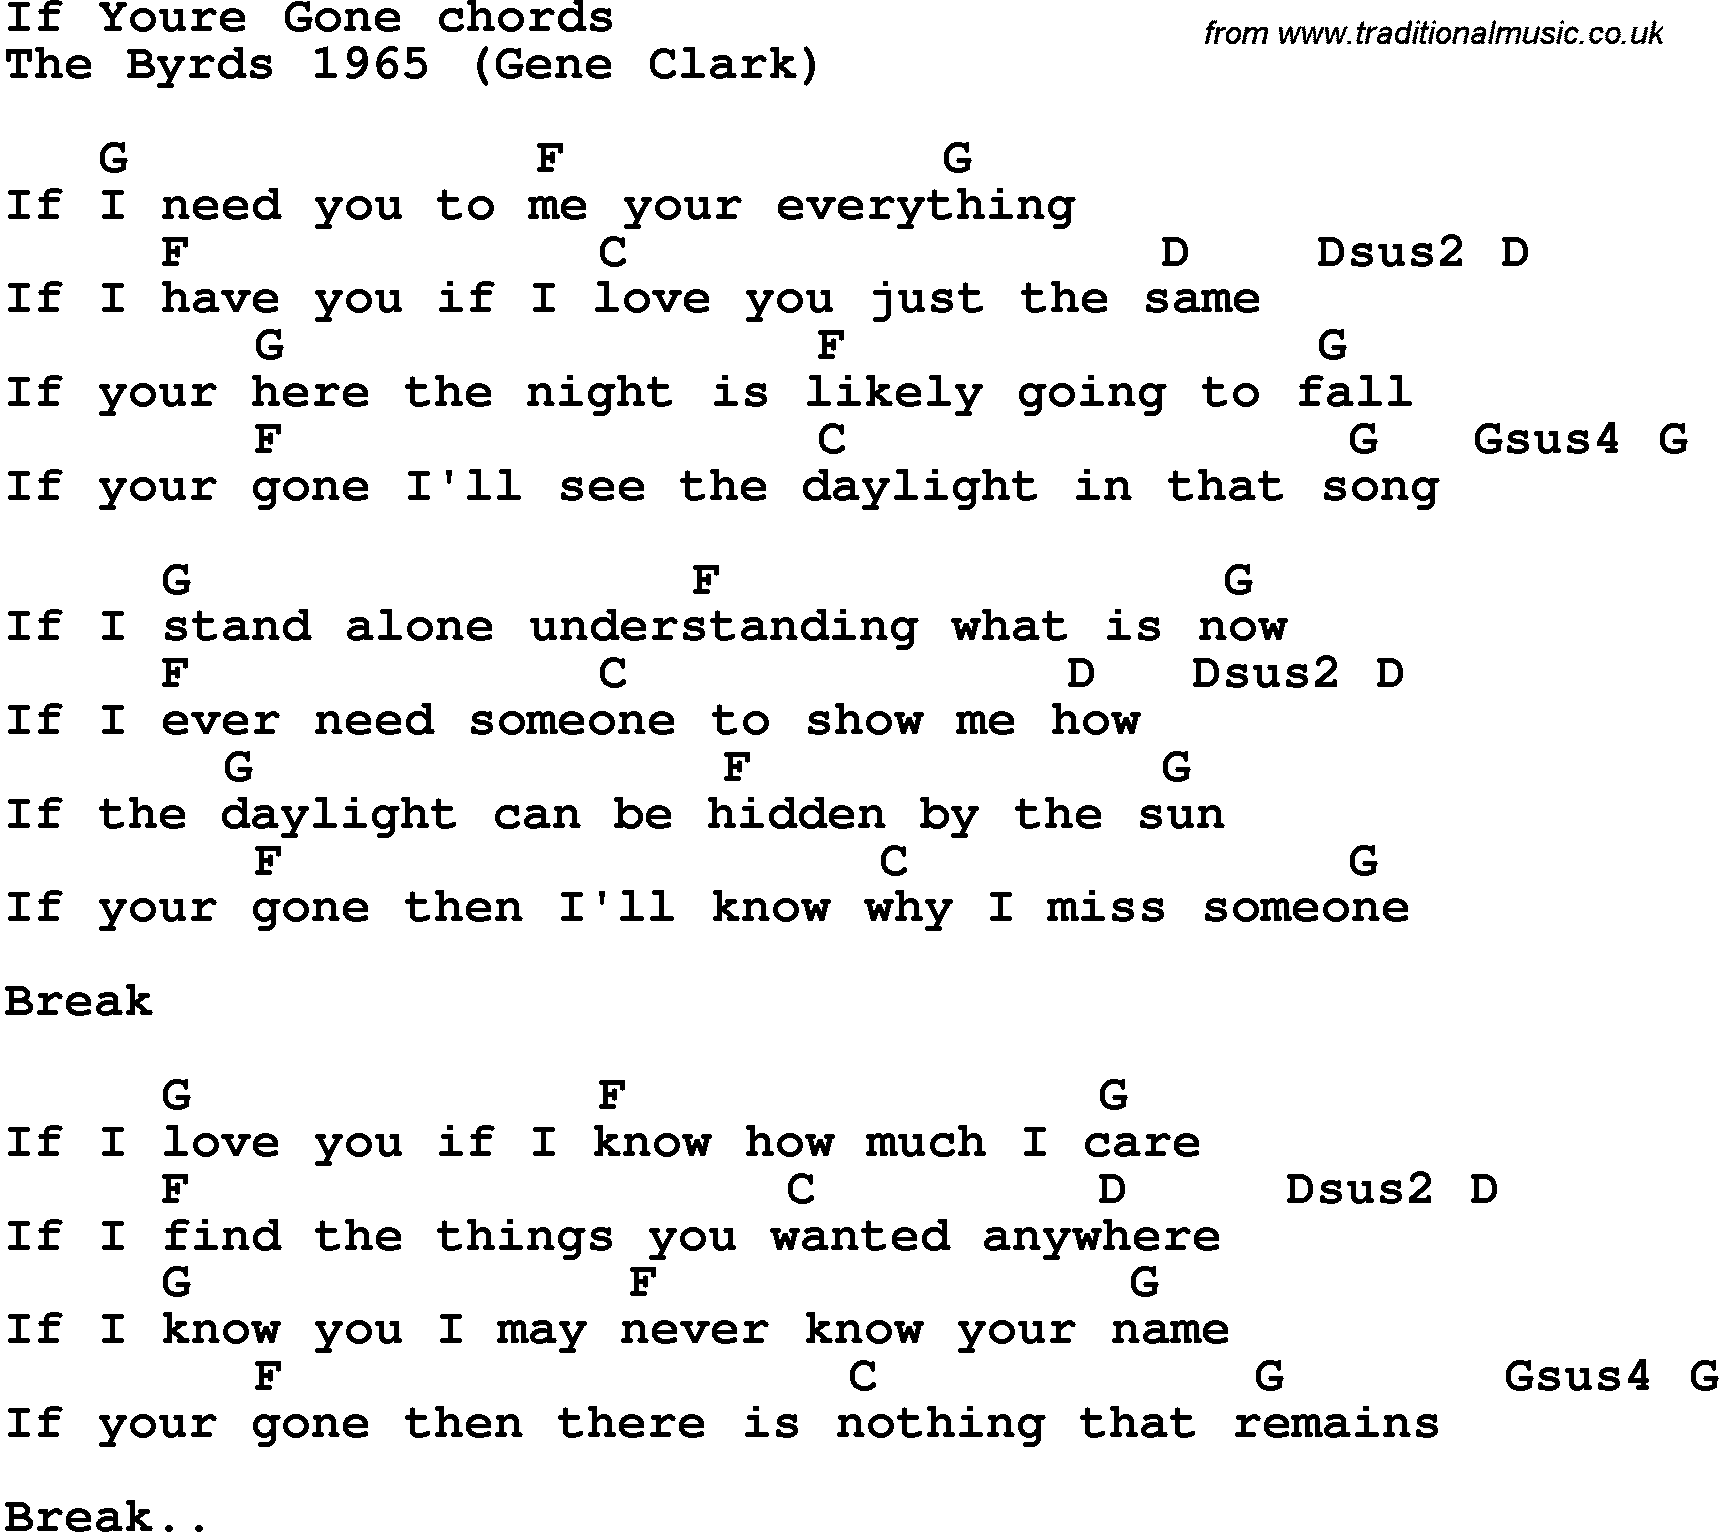 Song Lyrics with guitar chords for If You're Gone